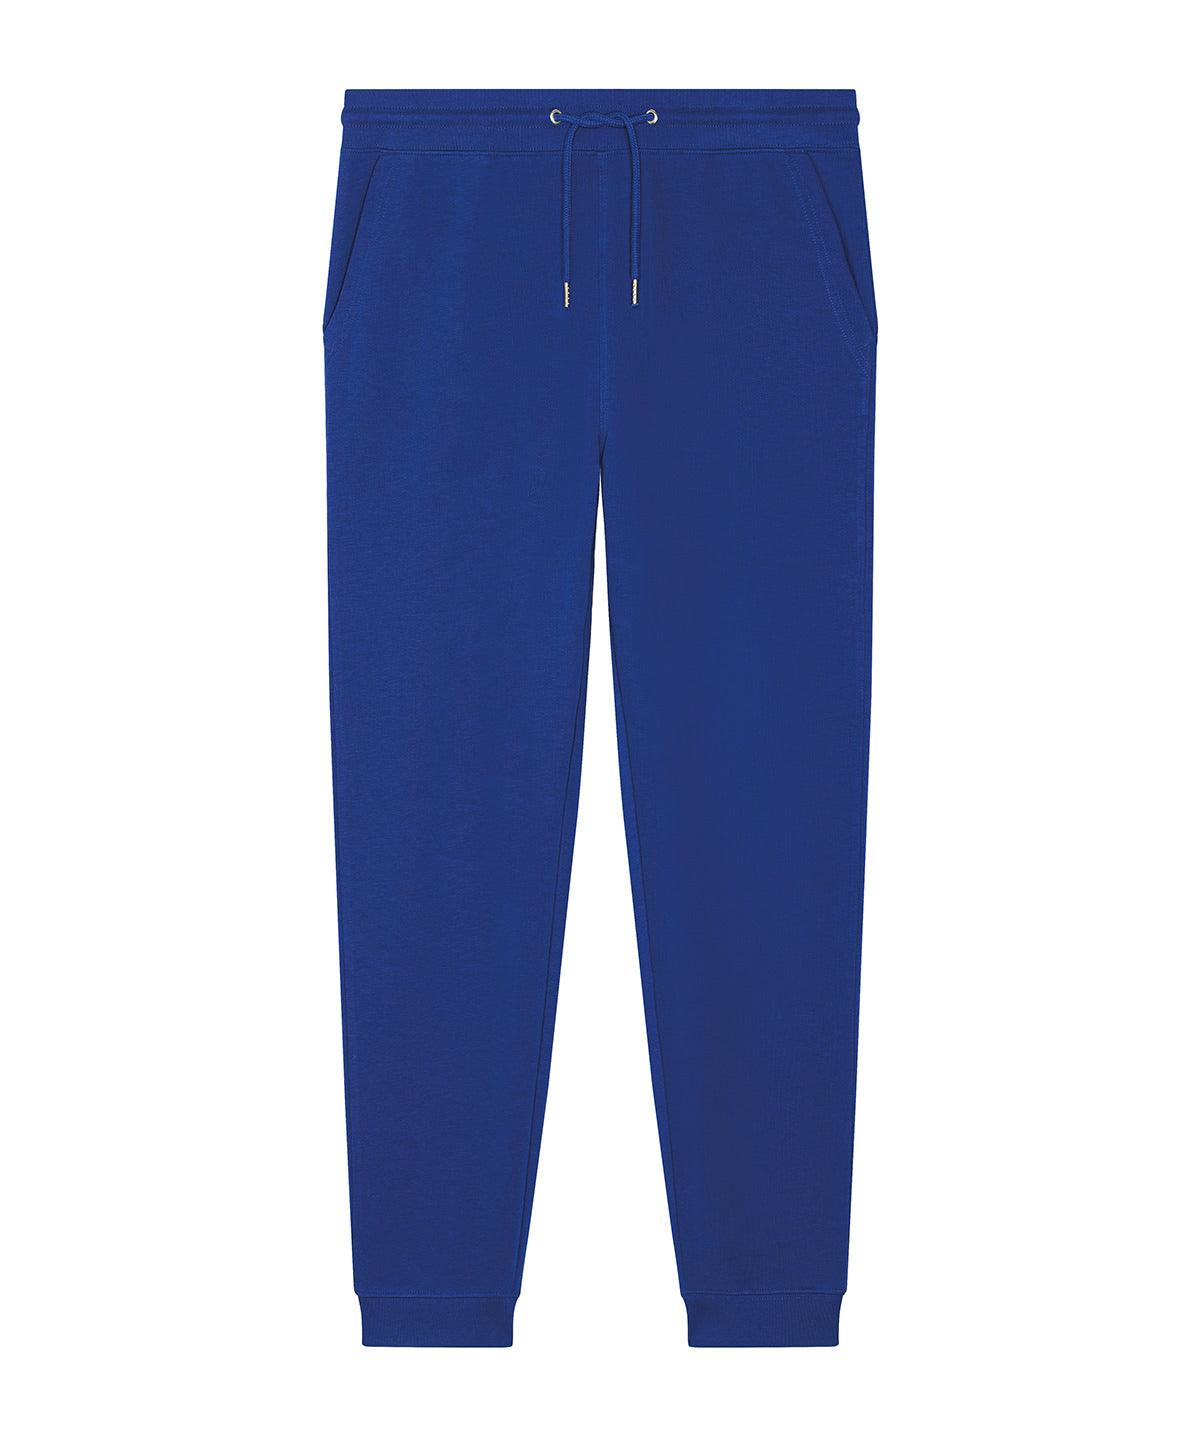 Worker Blue - Stanley Mover jogger pants (STBM569) Sweatpants Stanley/Stella Directory, Exclusives, Joggers, Must Haves, New Colours for 2021, New Products – February Launch, Organic & Conscious, Recycled, Stanley/ Stella Schoolwear Centres